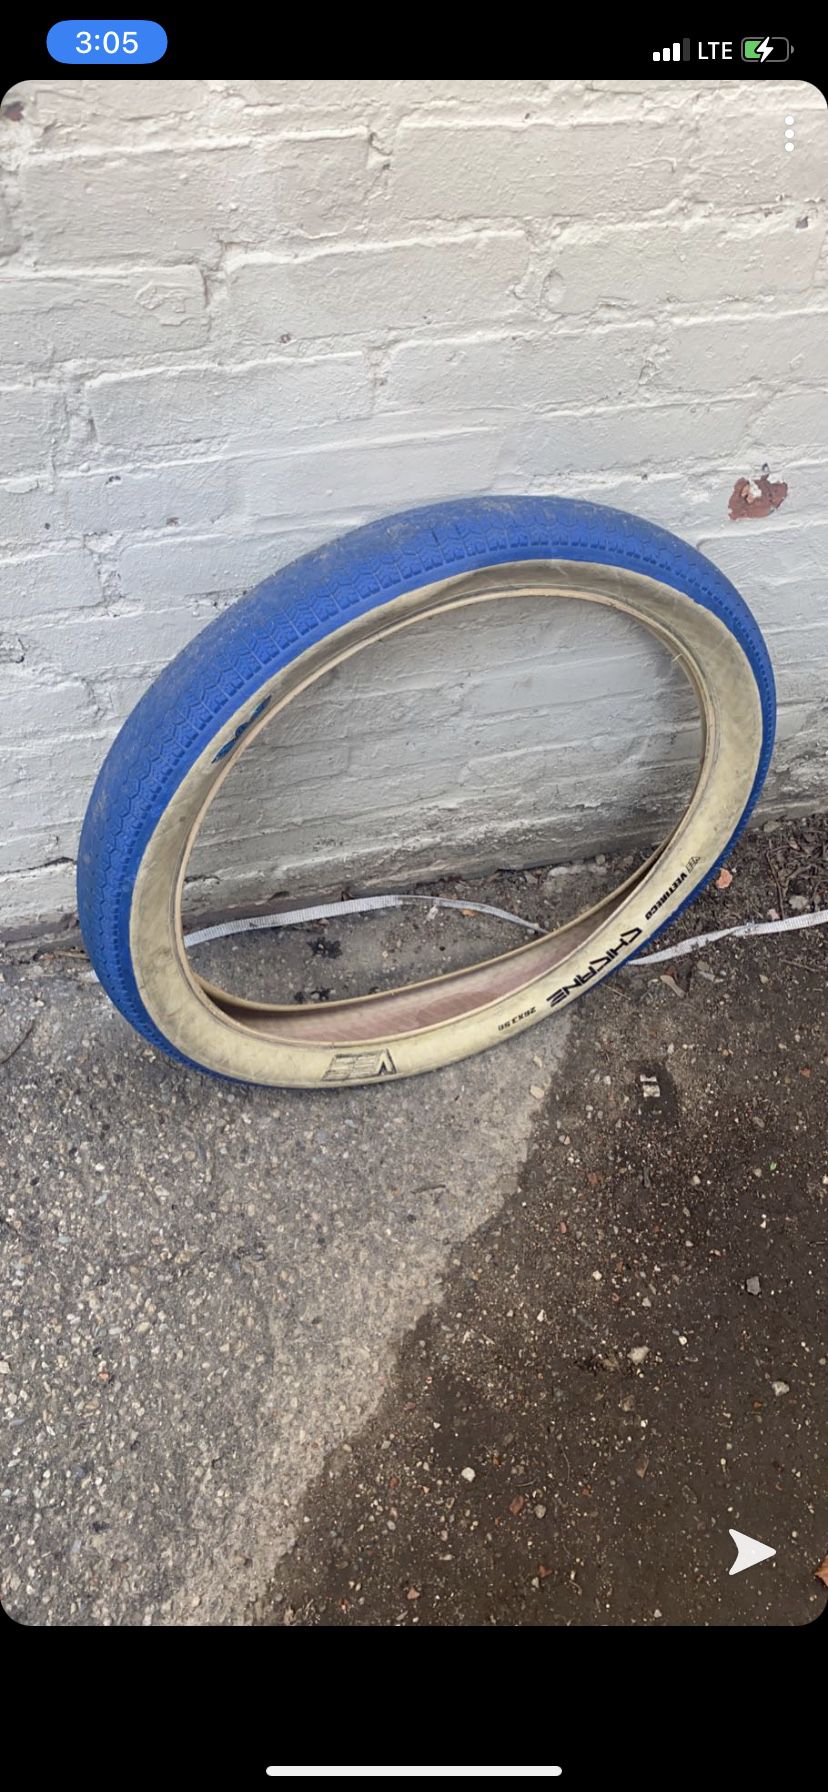 Blue tire for the fatty no holes no skid marks none of that.